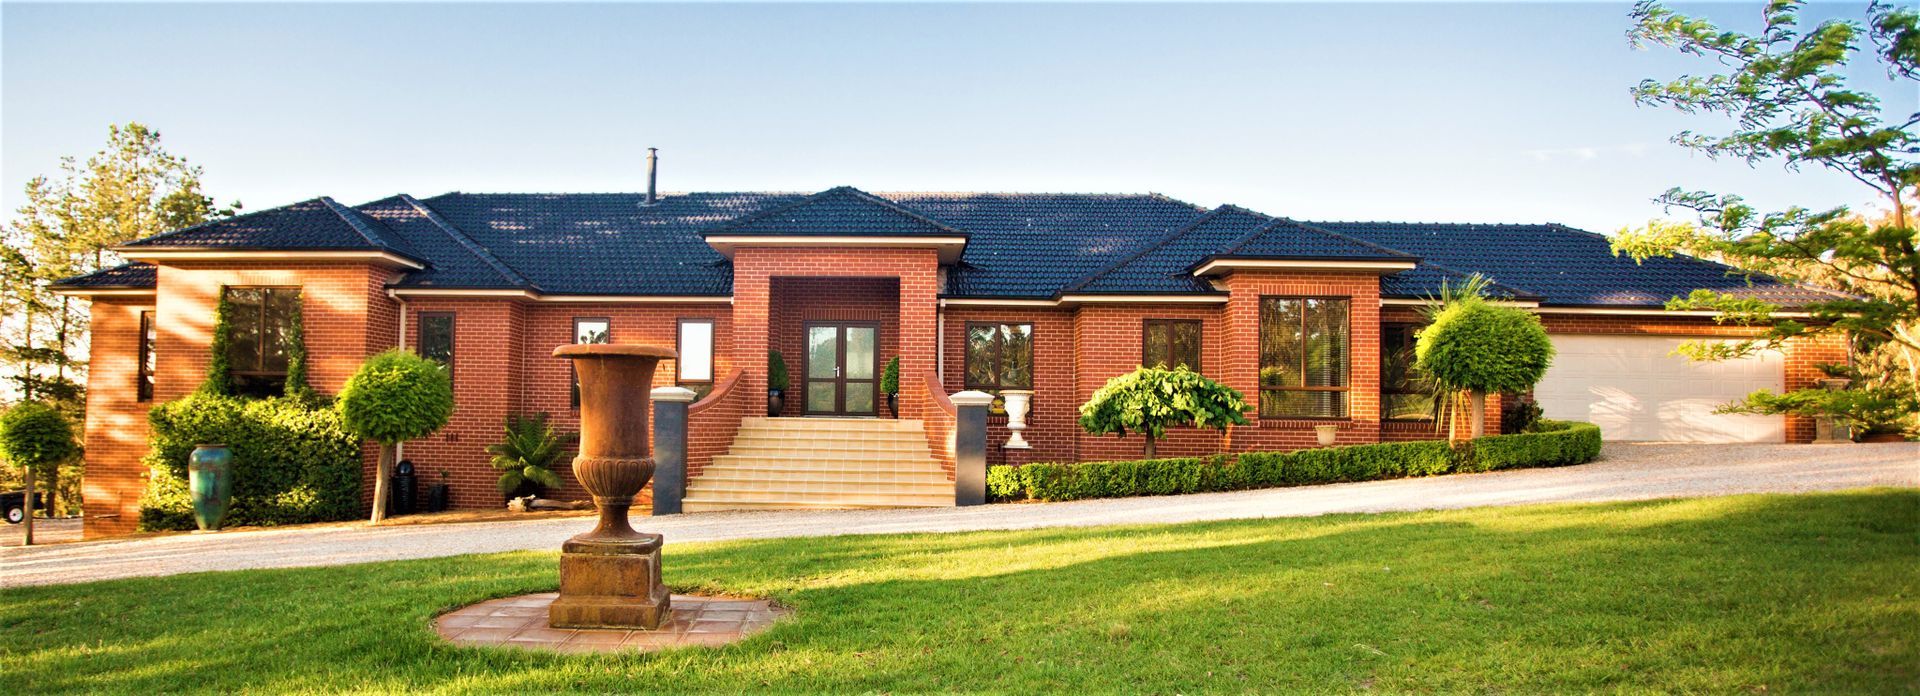 816 Bungendore Road, Bywong NSW 2621